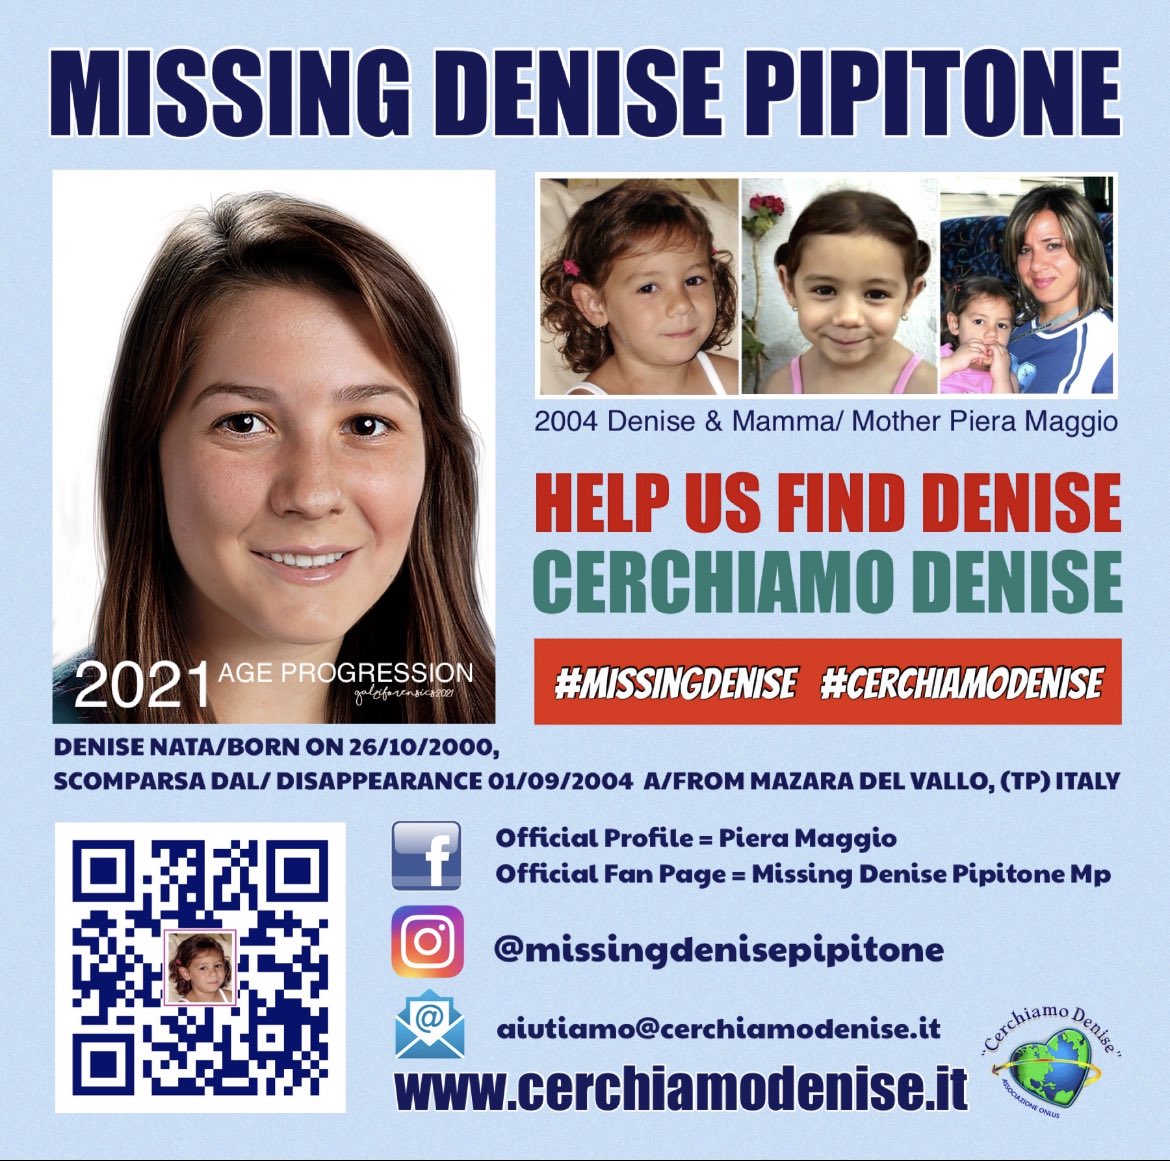 #DenisePipitone was abducted when she was almost 4 in 2004.
Please share to help find her 🩵#CerchiamoDenise #MissingDenise #Missing #MissingPerson #Italy #World #PopolodiDenise